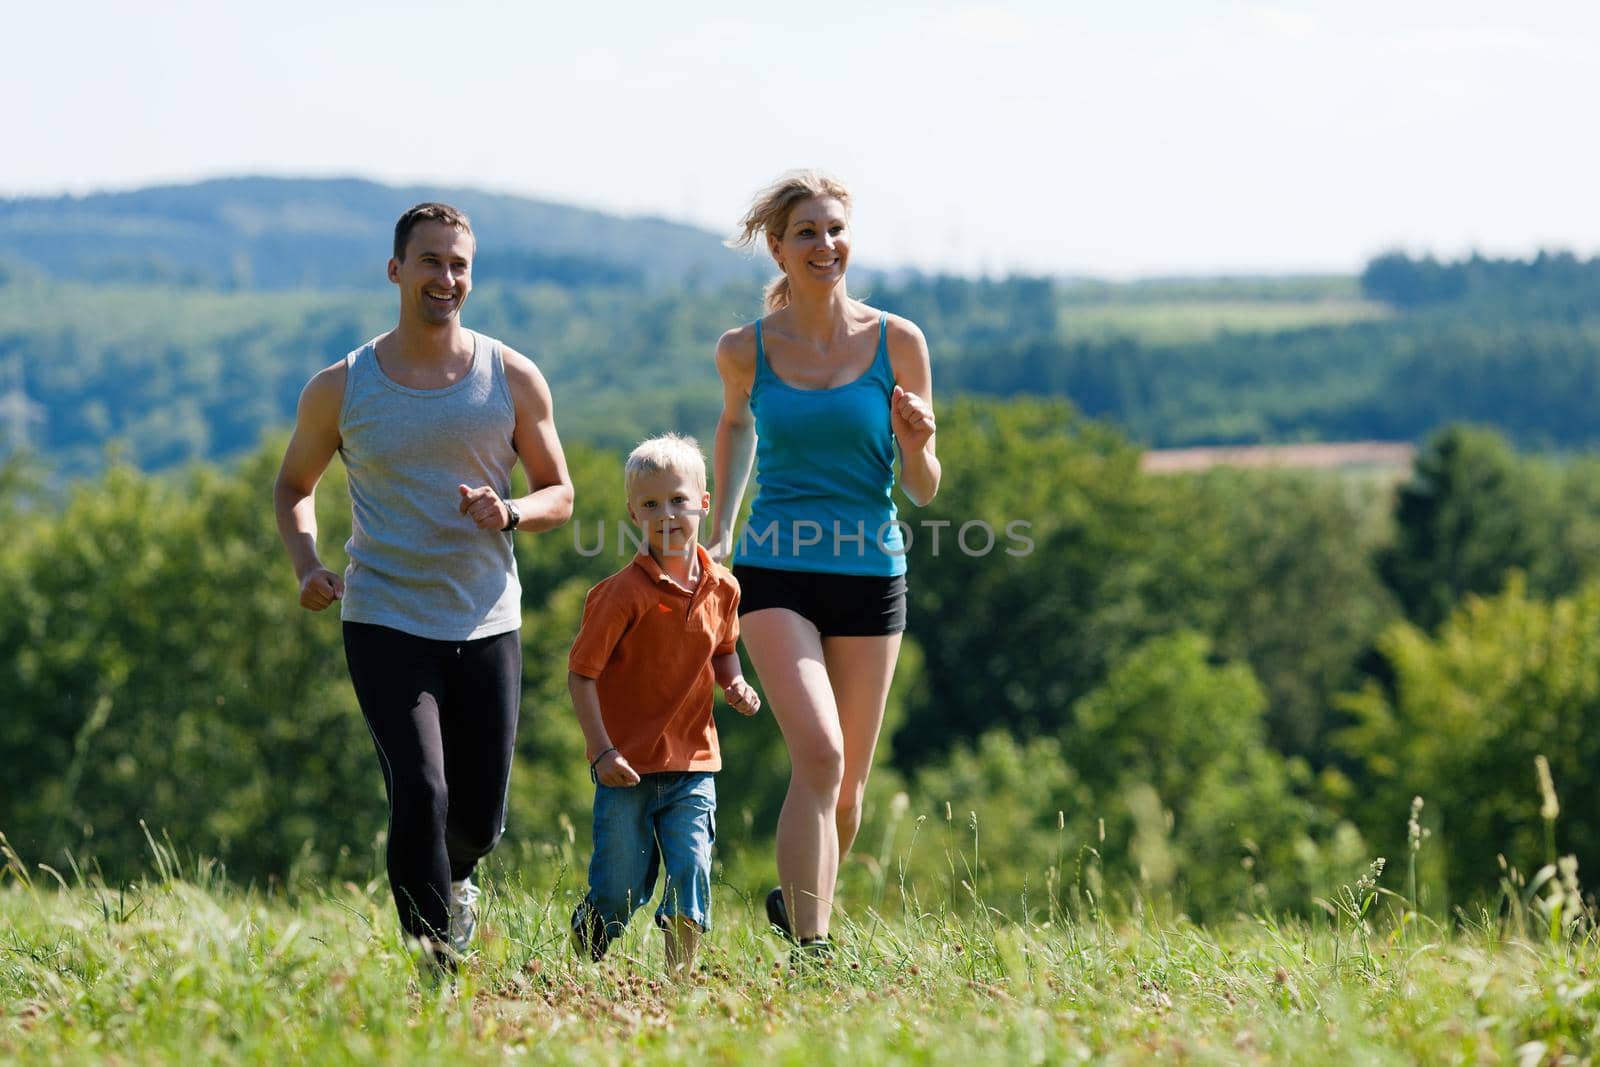 Active Family jogging outdoors in beautiful summer landscape 